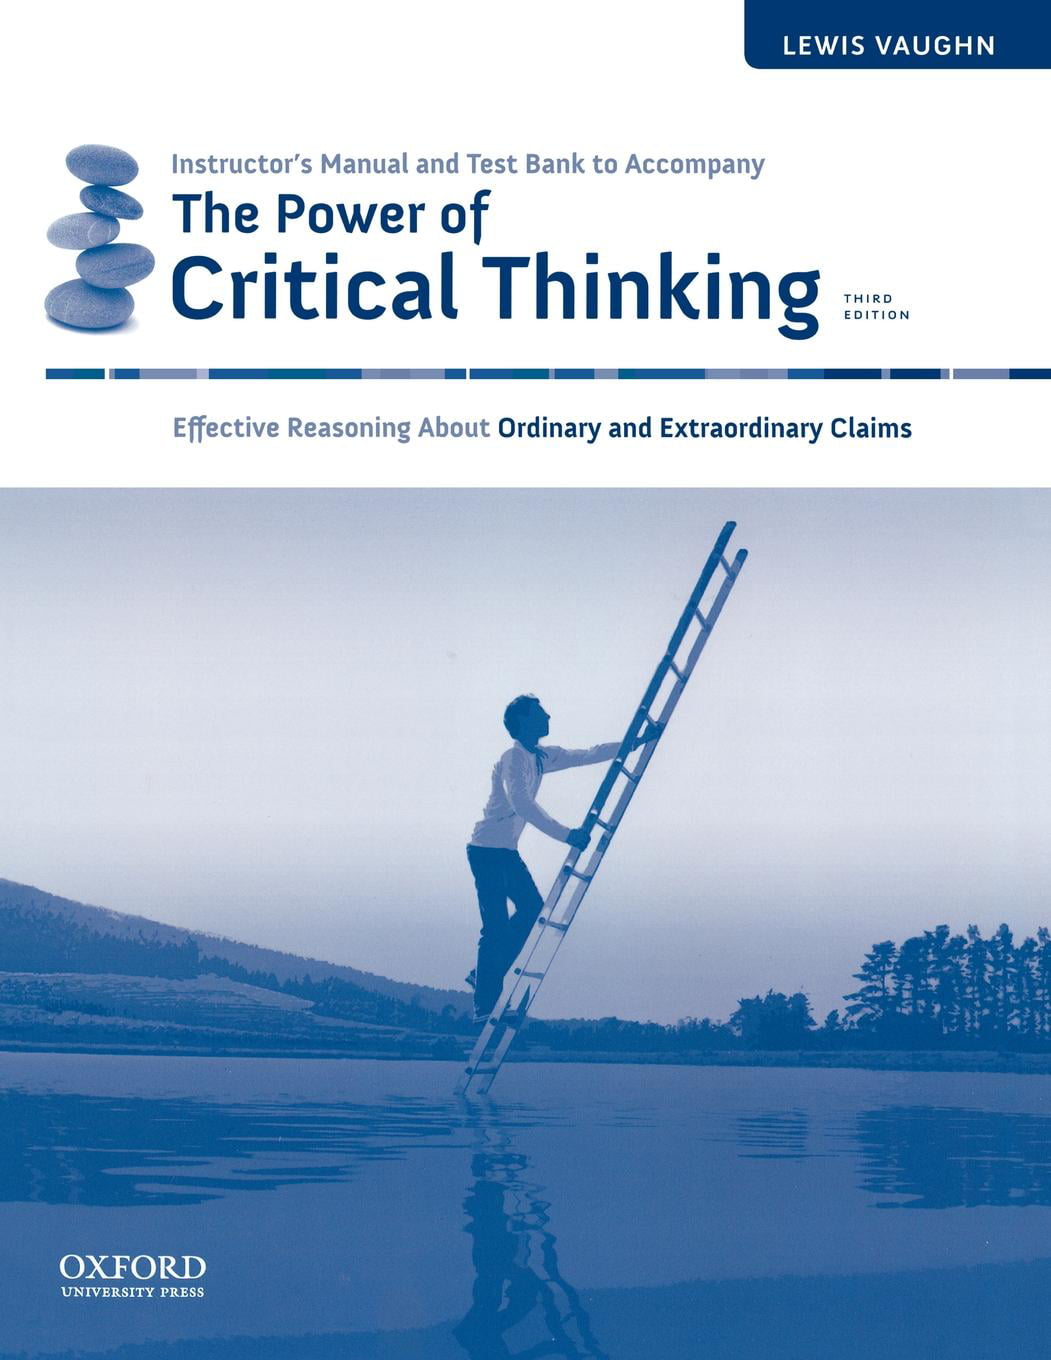 Instructor's Maunal and Test Bank to the Power of Critical Thinking, 3rd Edition